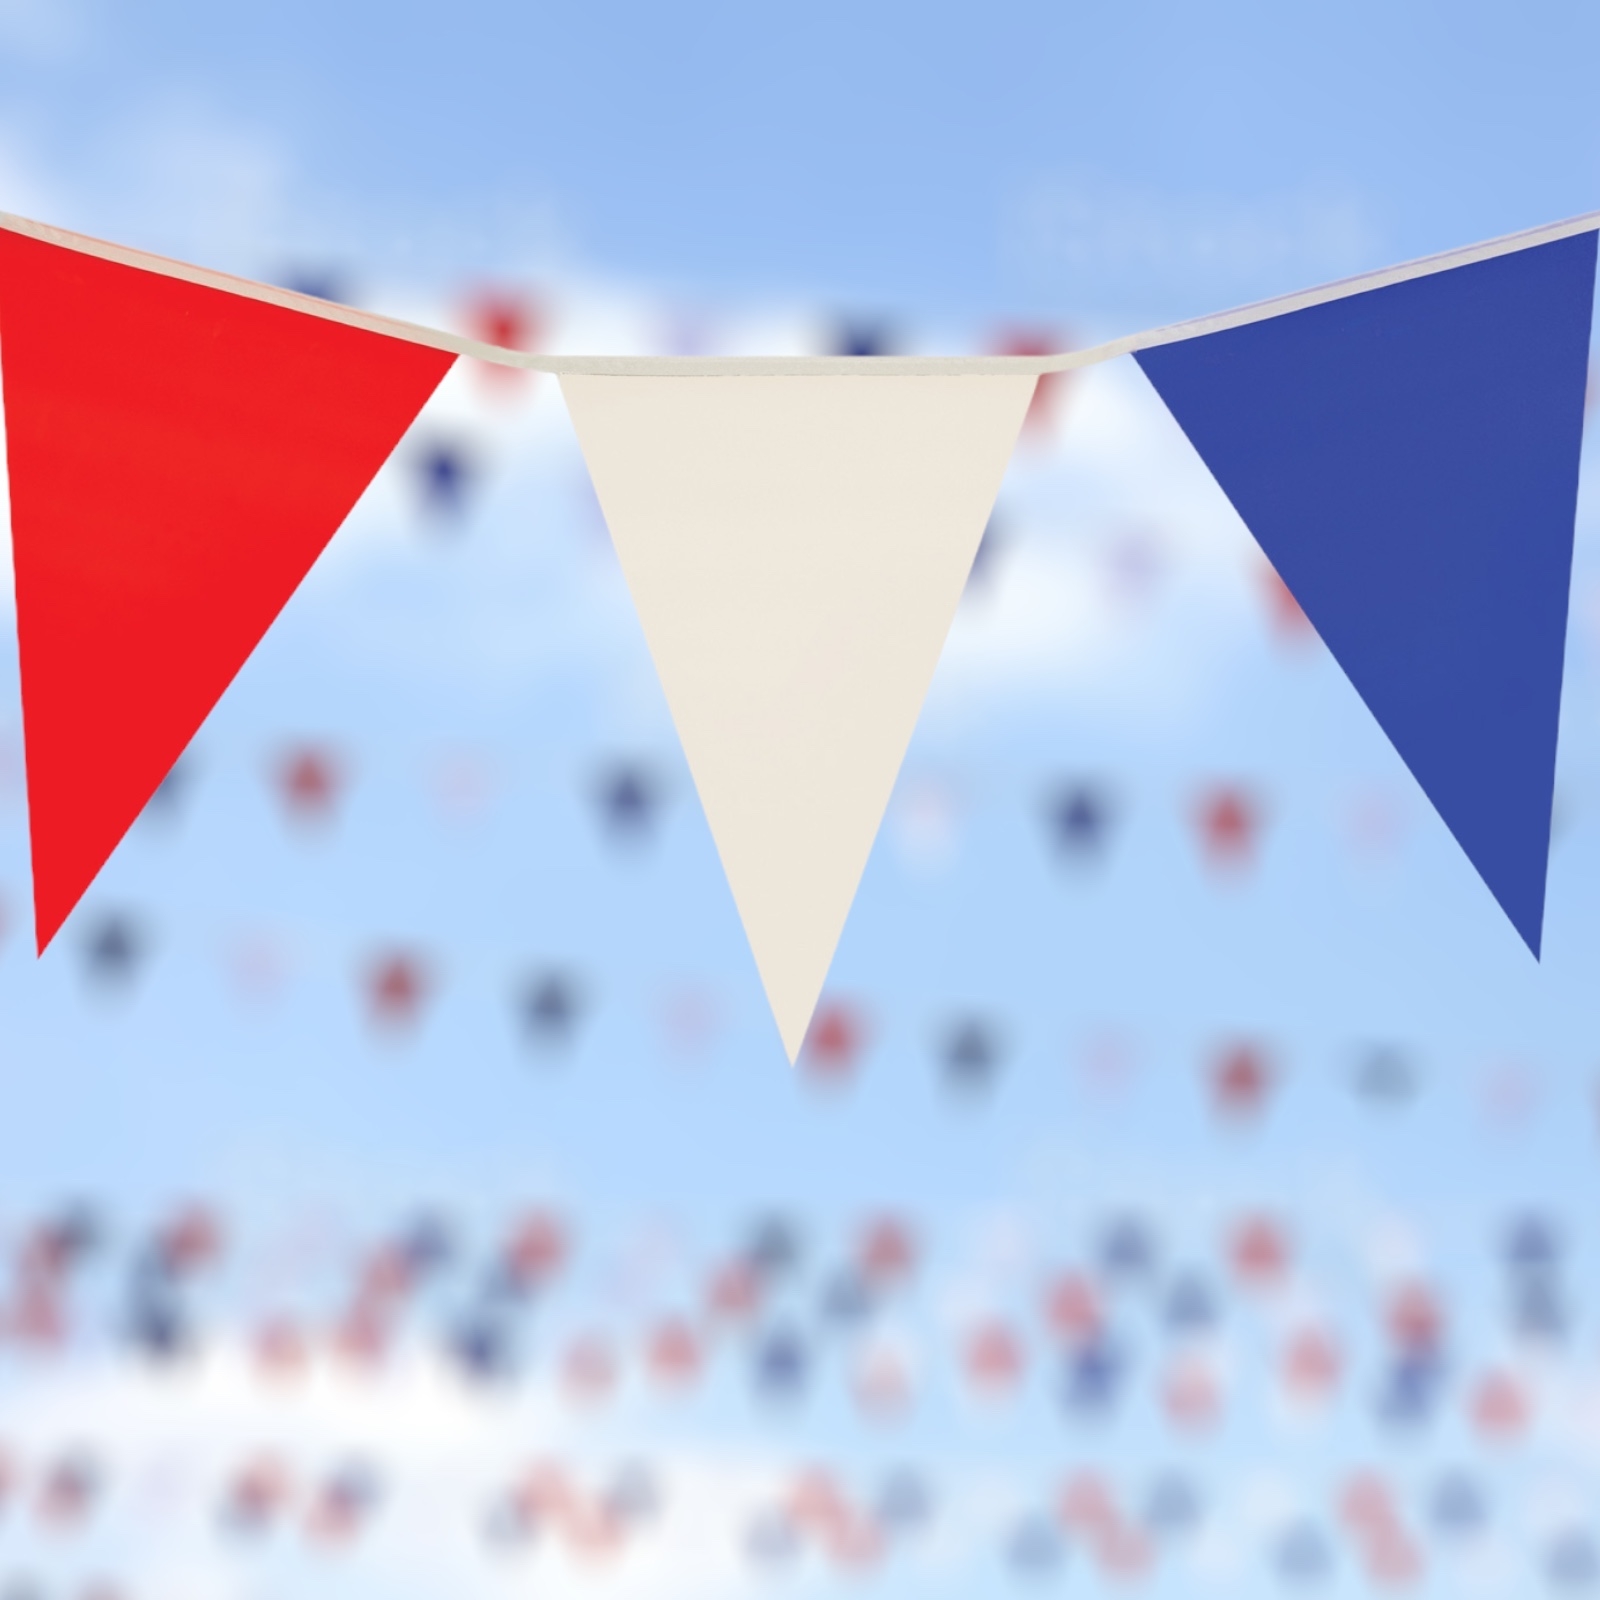 Red White And Blue Bunting 7m